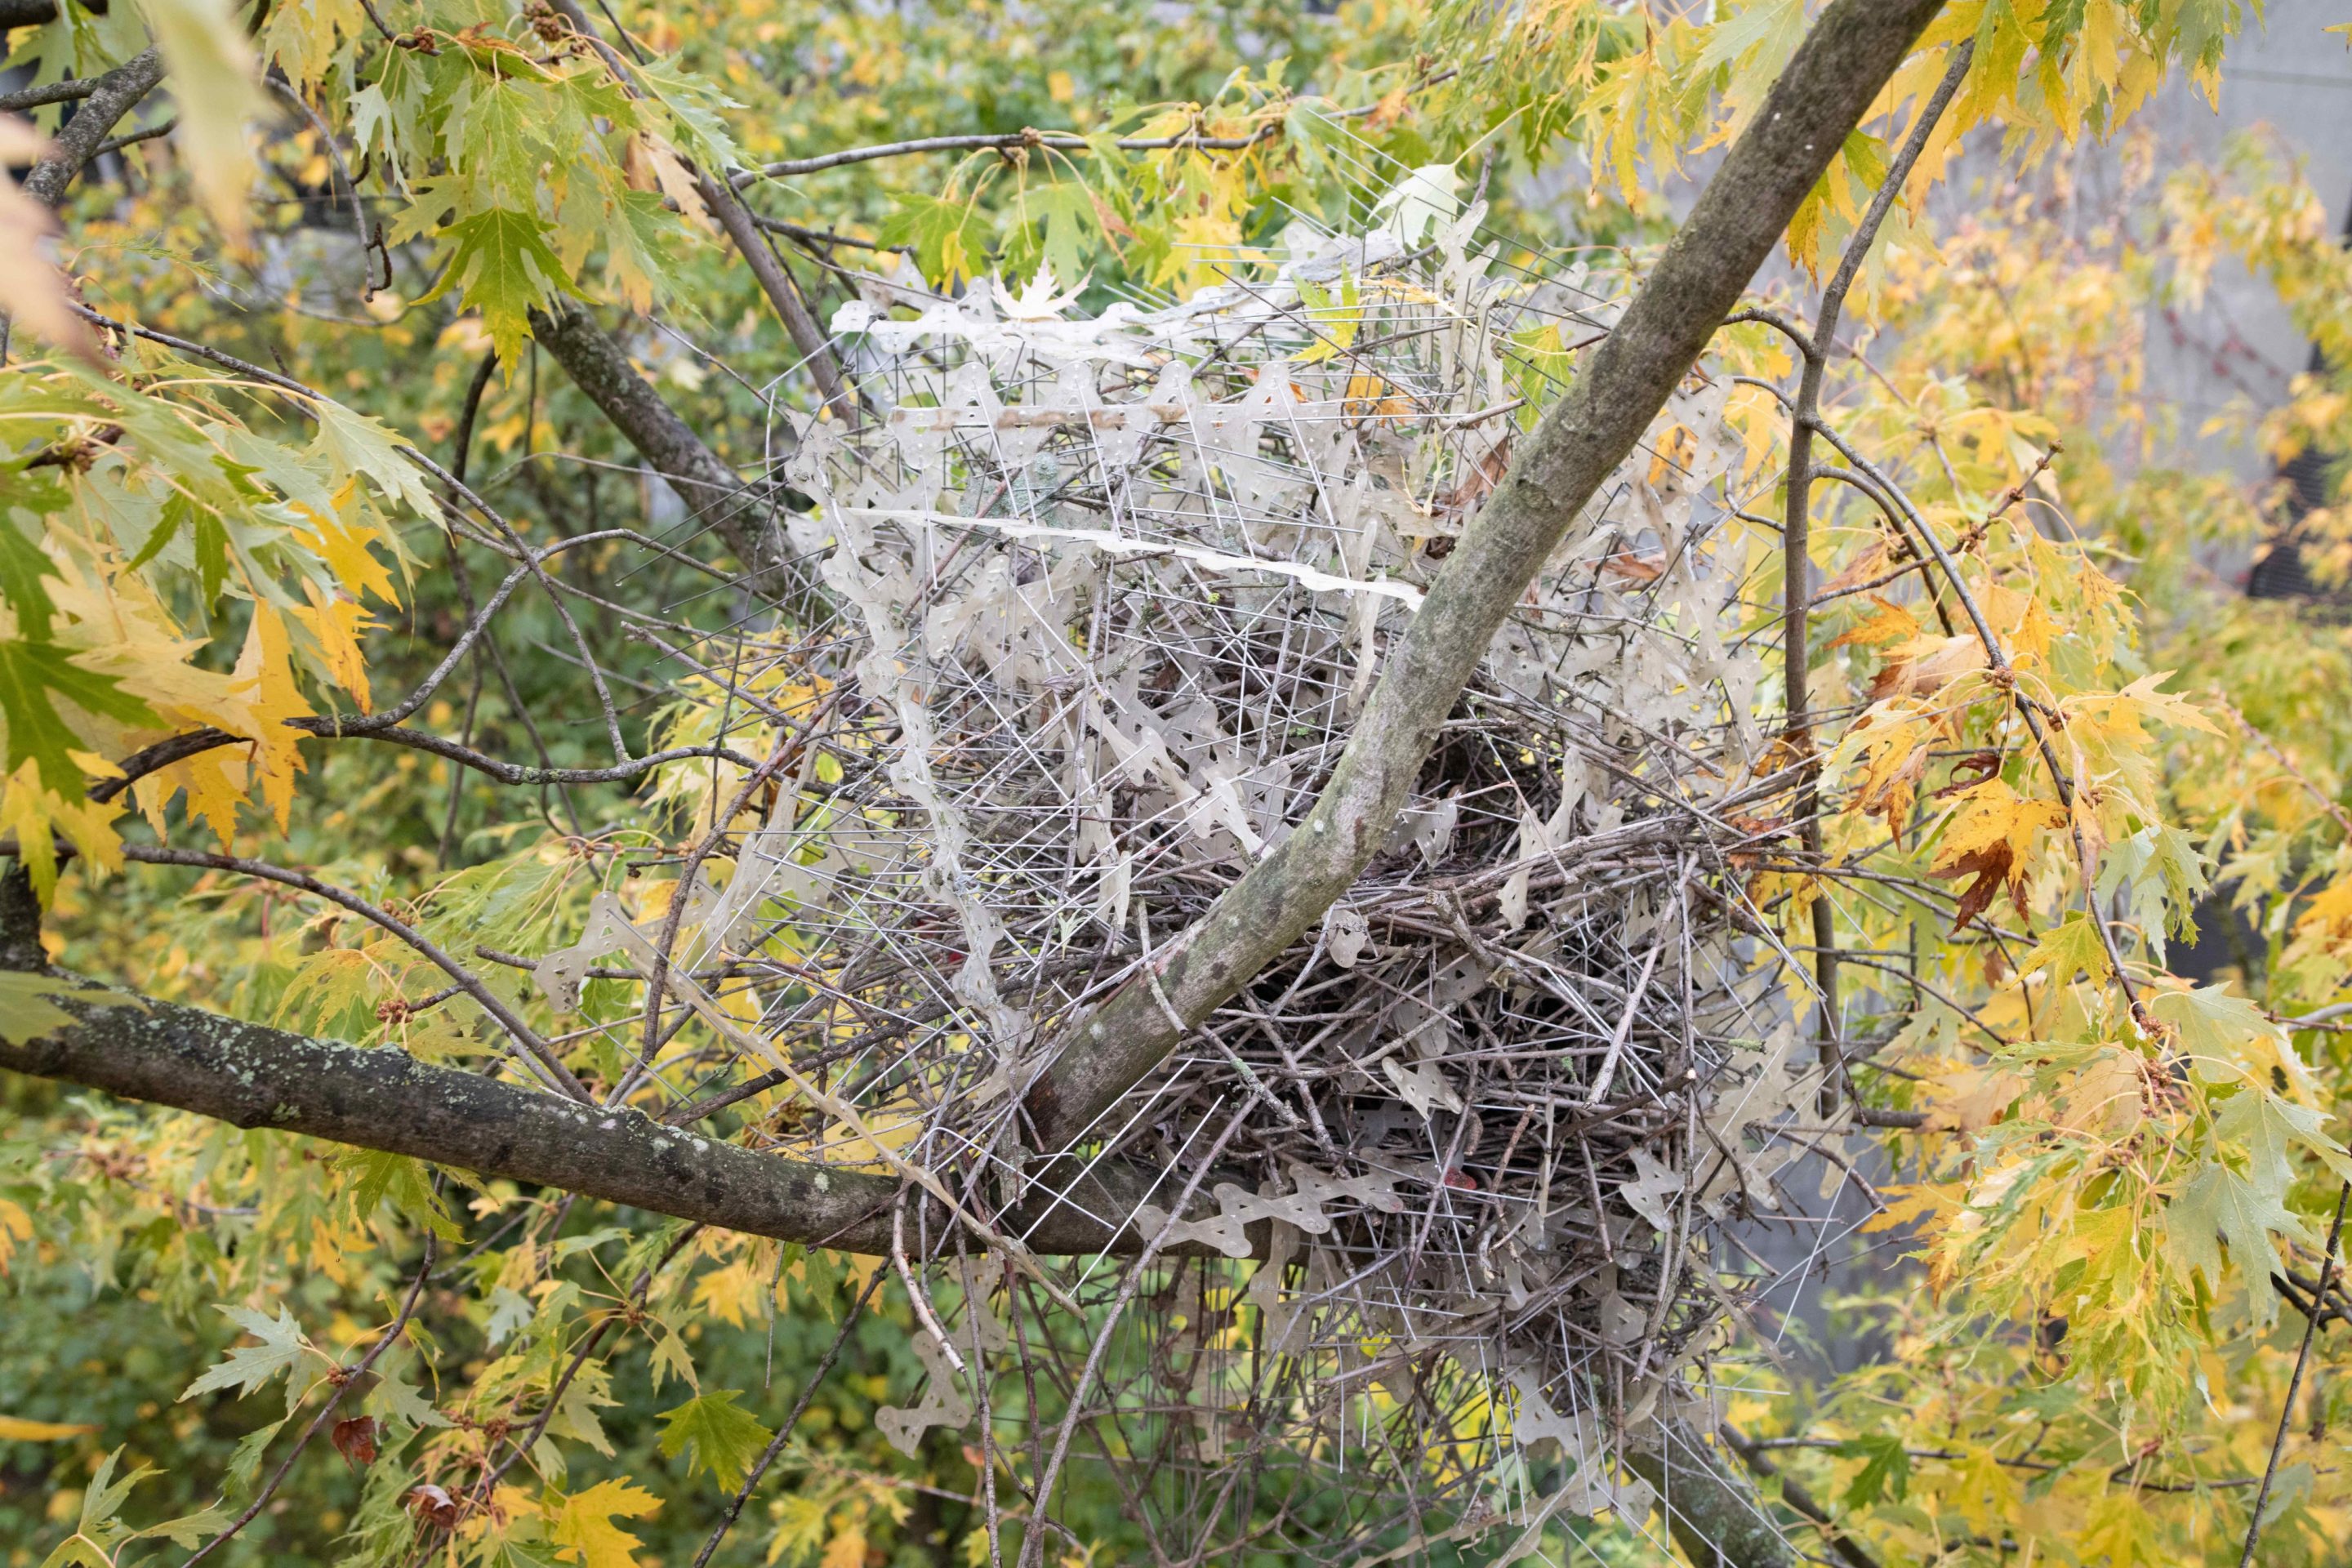 a magpie nest in a tree. the nest is built from a bunch of anti-bird spikes, which are long spiky needles attached to strips.